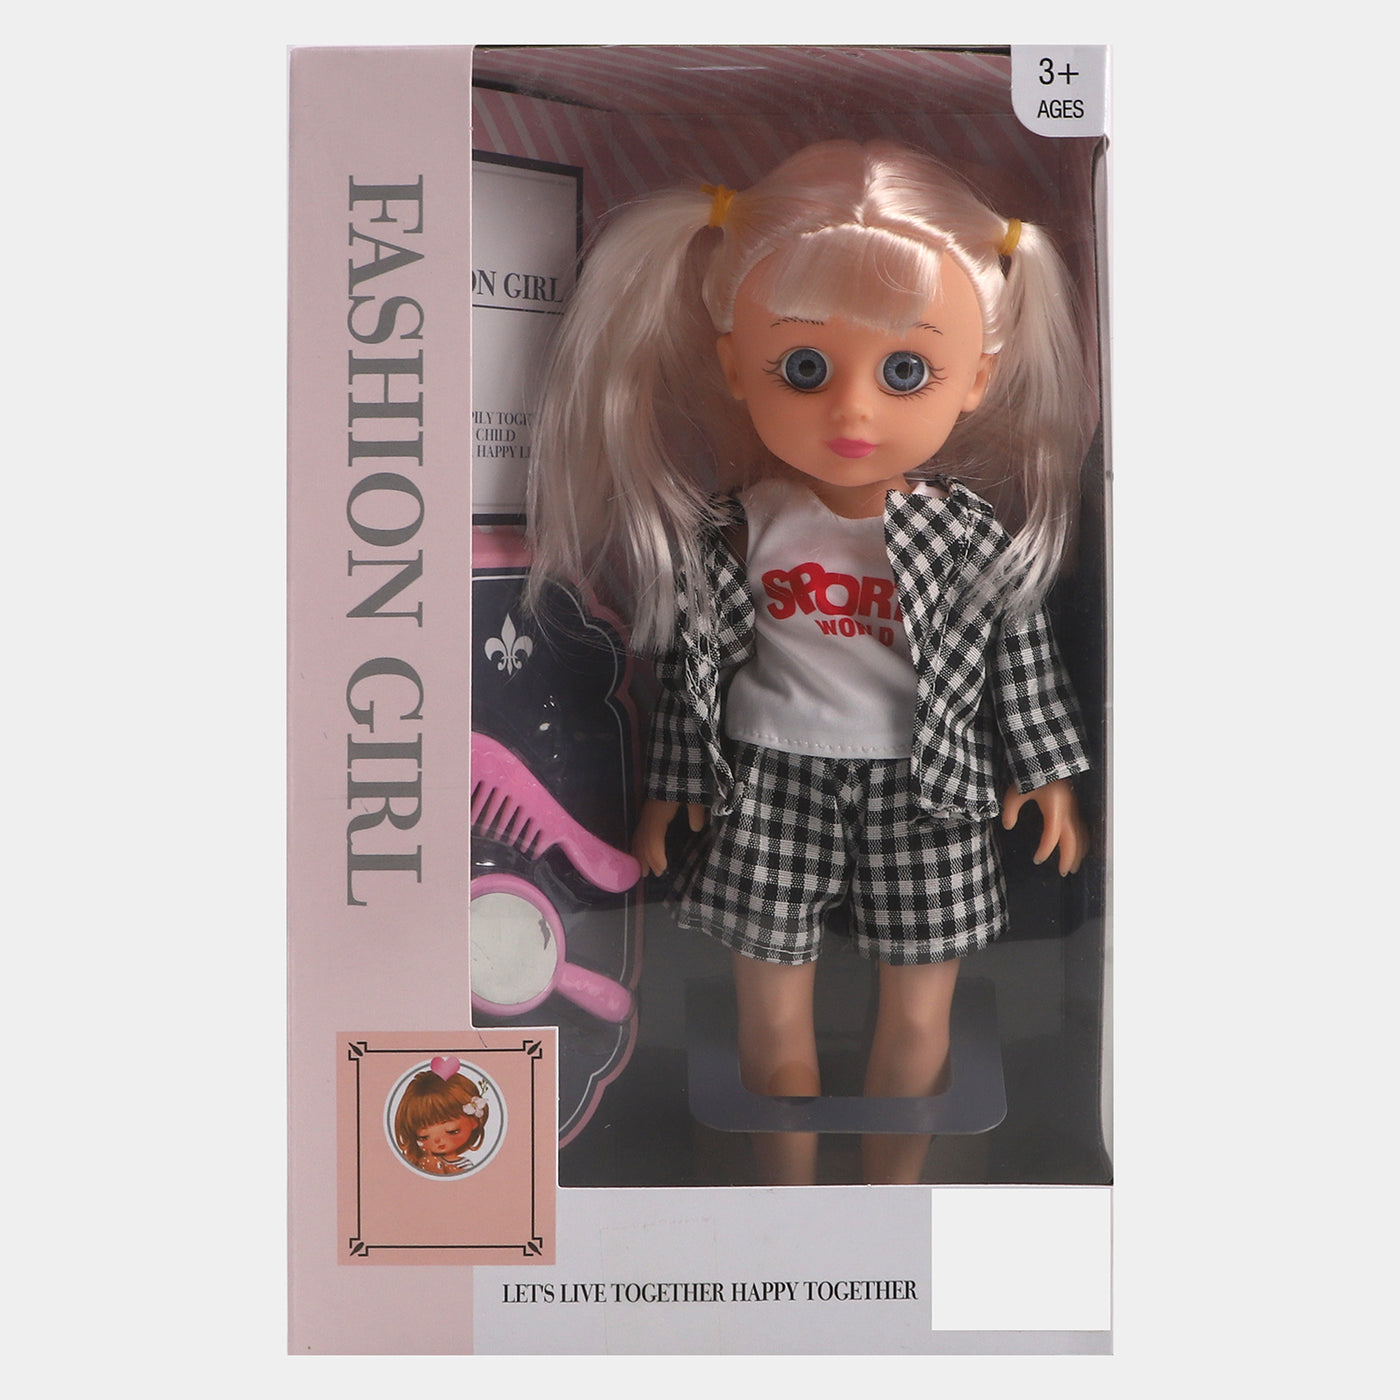 Beautiful Fashionable Doll With Sound